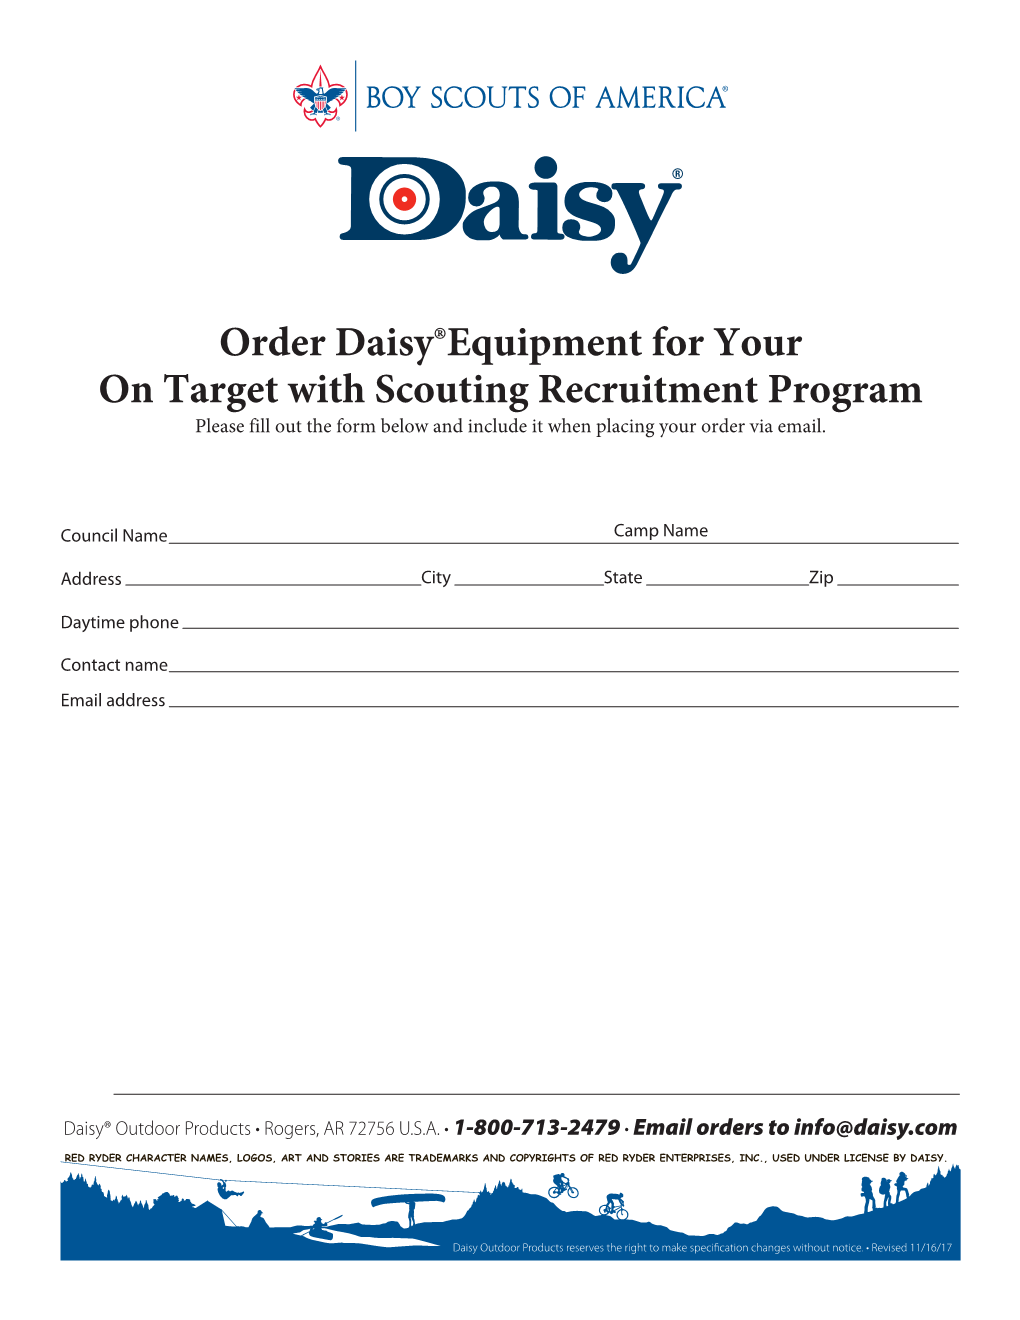 Order Daisy®Equipment for Your on Target with Scouting Recruitment Program Please Fill out the Form Below and Include It When Placing Your Order Via Email